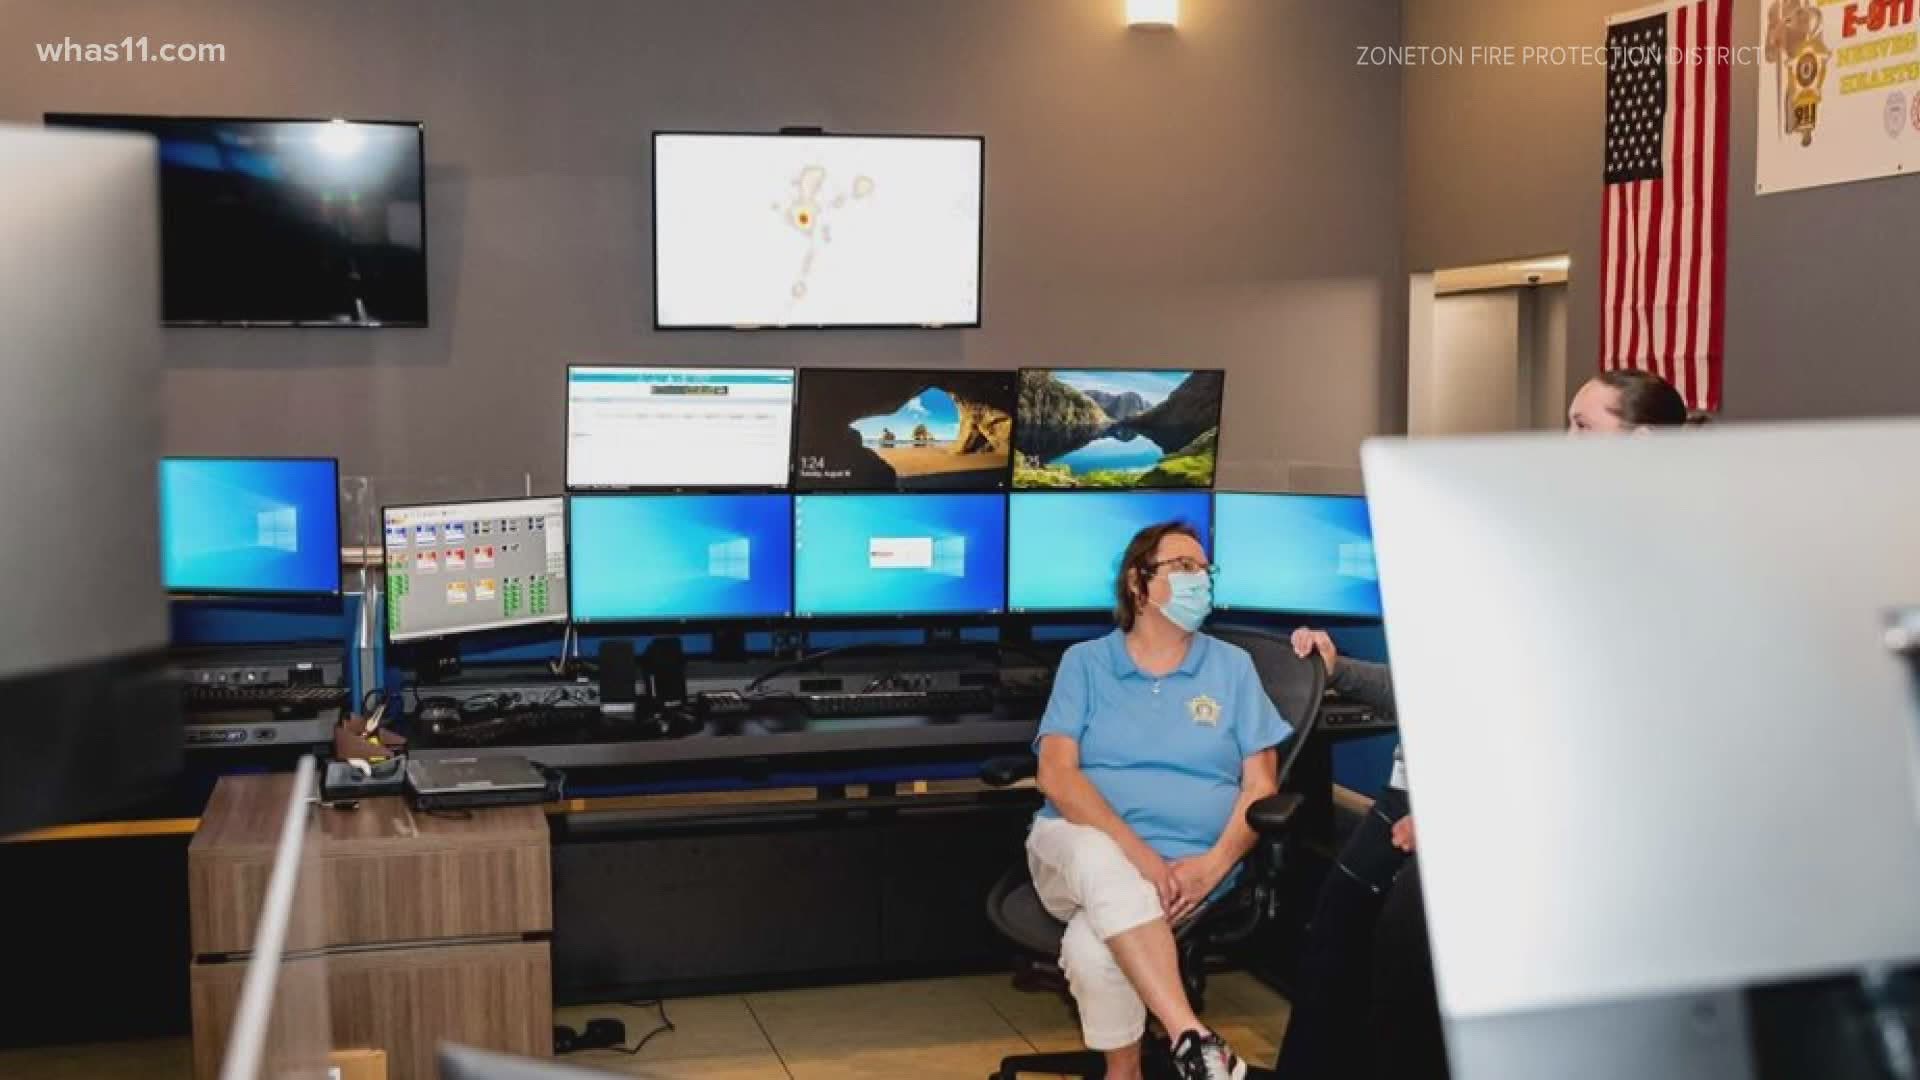 Bullitt County launched its new E-911 dispatch center. County leaders said they experienced several issues over the past years with system failures.